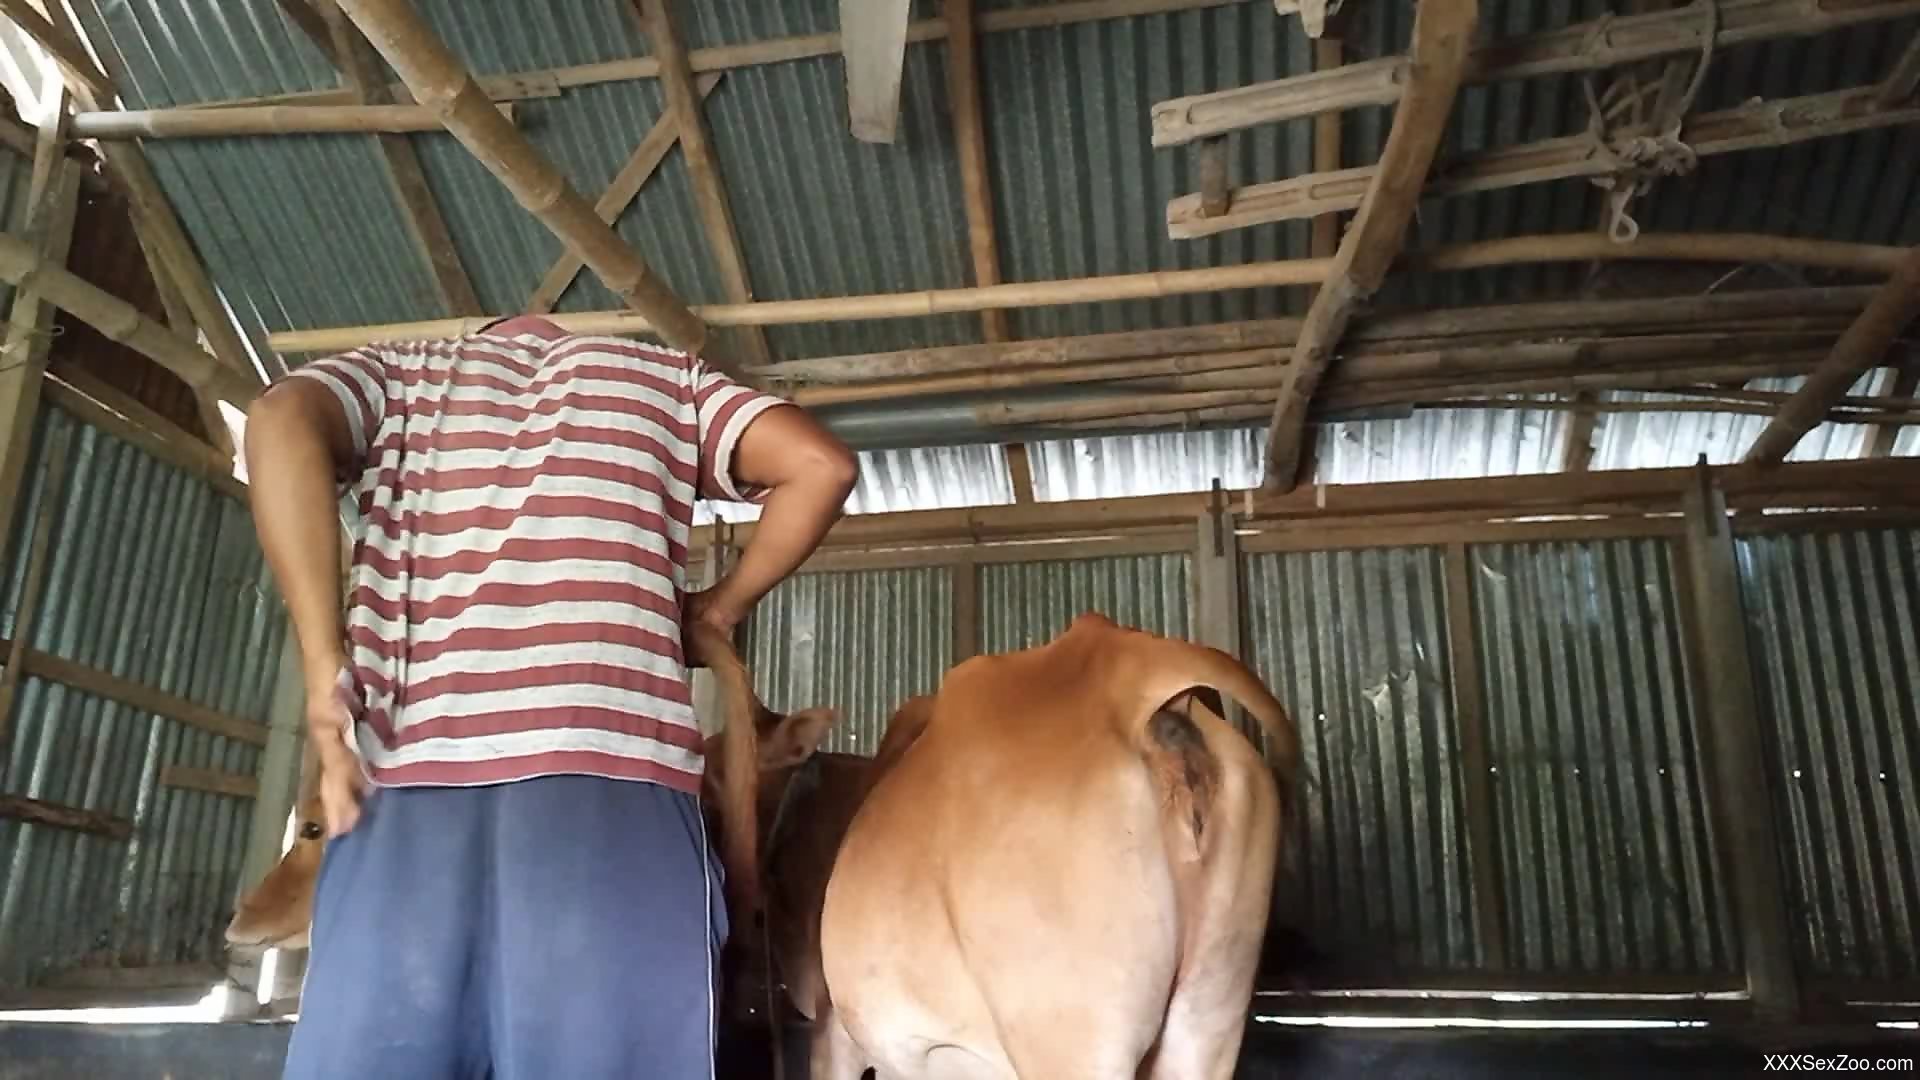 Gay Beast Fuck Cow Hd - Horny farm guy craves cow's pussy for a few rounds - XXXSexZoo.com